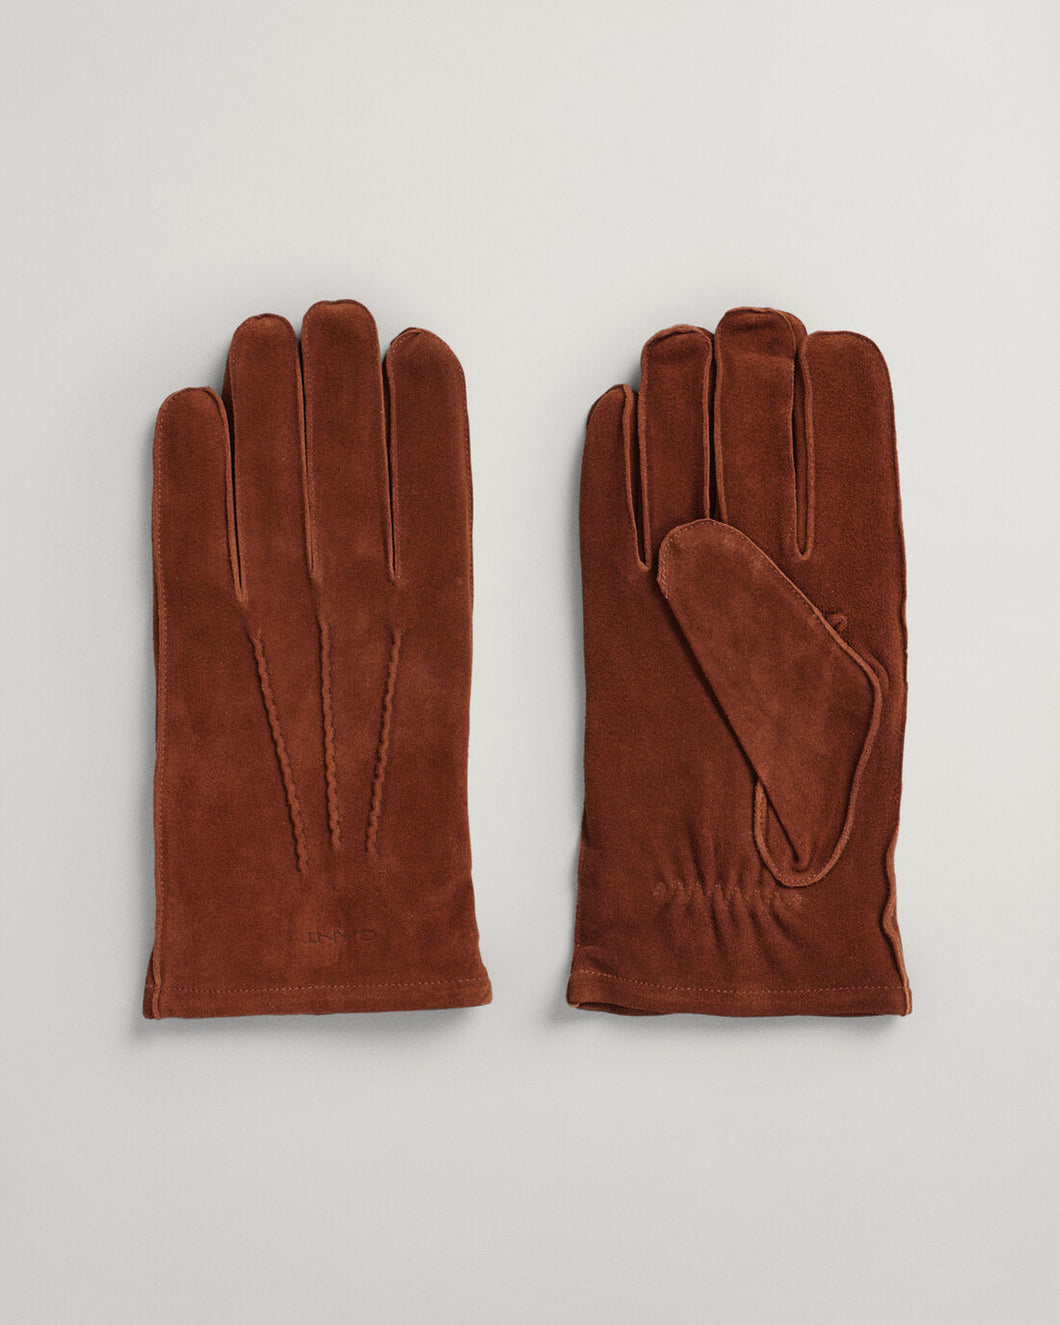 GANT - Classic Suede Gloves, Cashmere Lining, Clay Brown